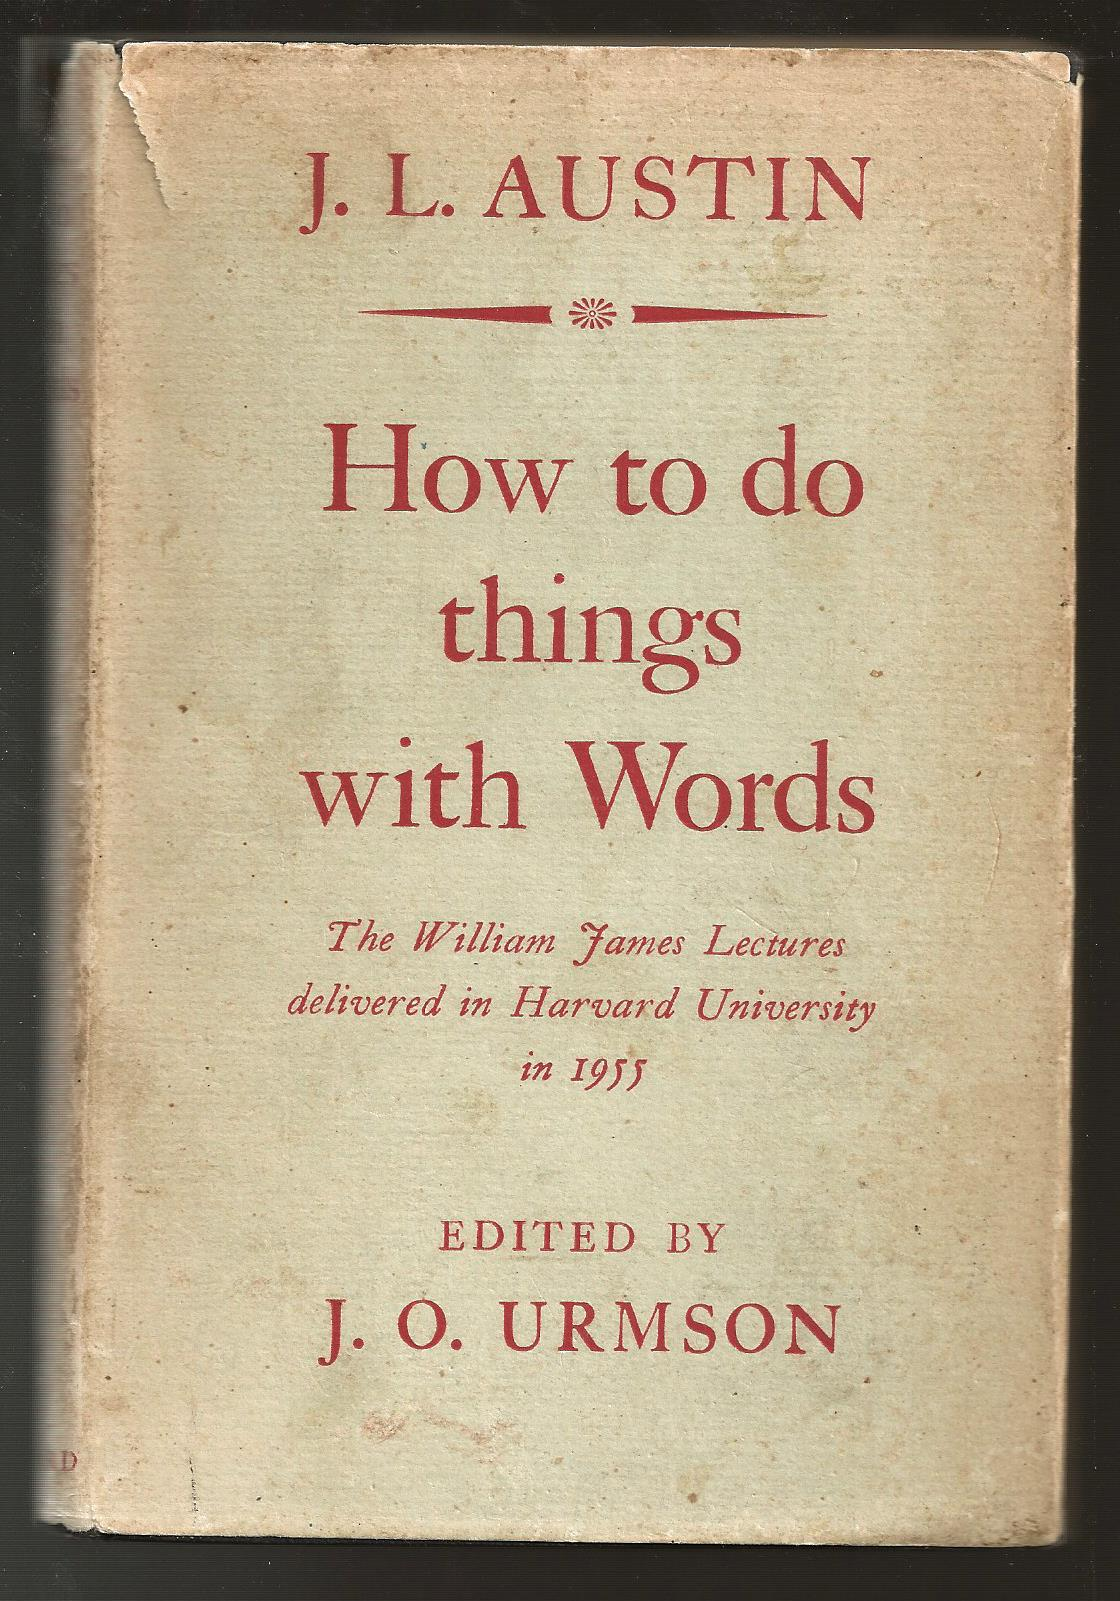 Джон Остин речевые акты. How to do things with Words. How to do things with Words Austin. Джон Остин юридический позитивизм. That s a thing to do